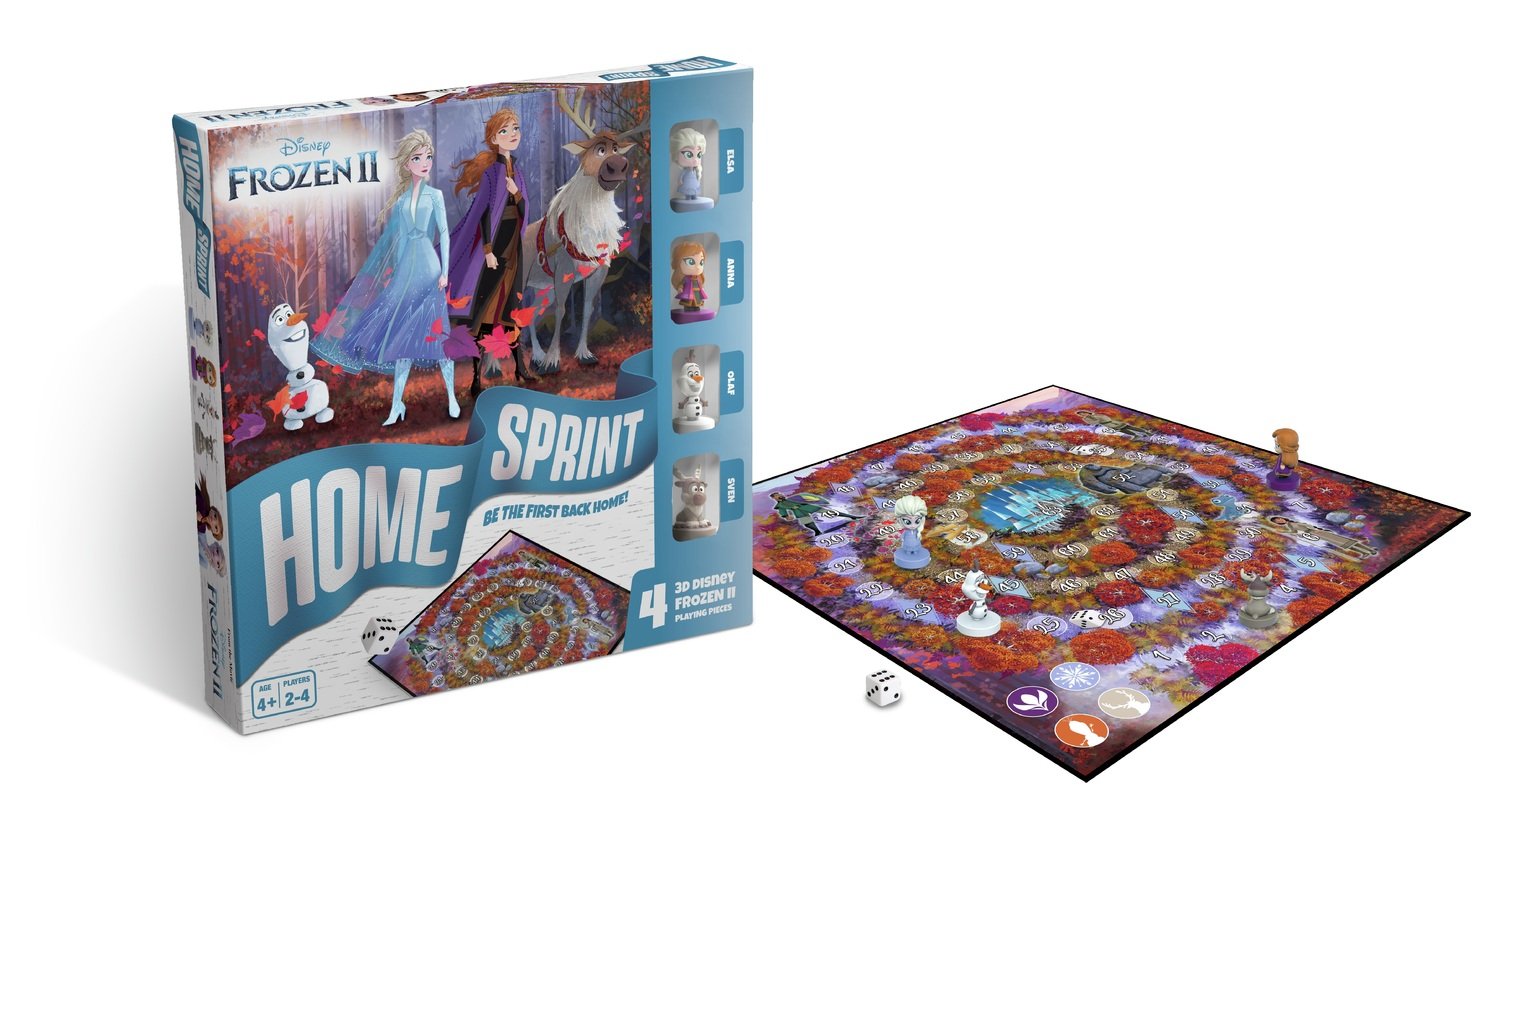 Disney Frozen 2 Home Sprint Board Game Review